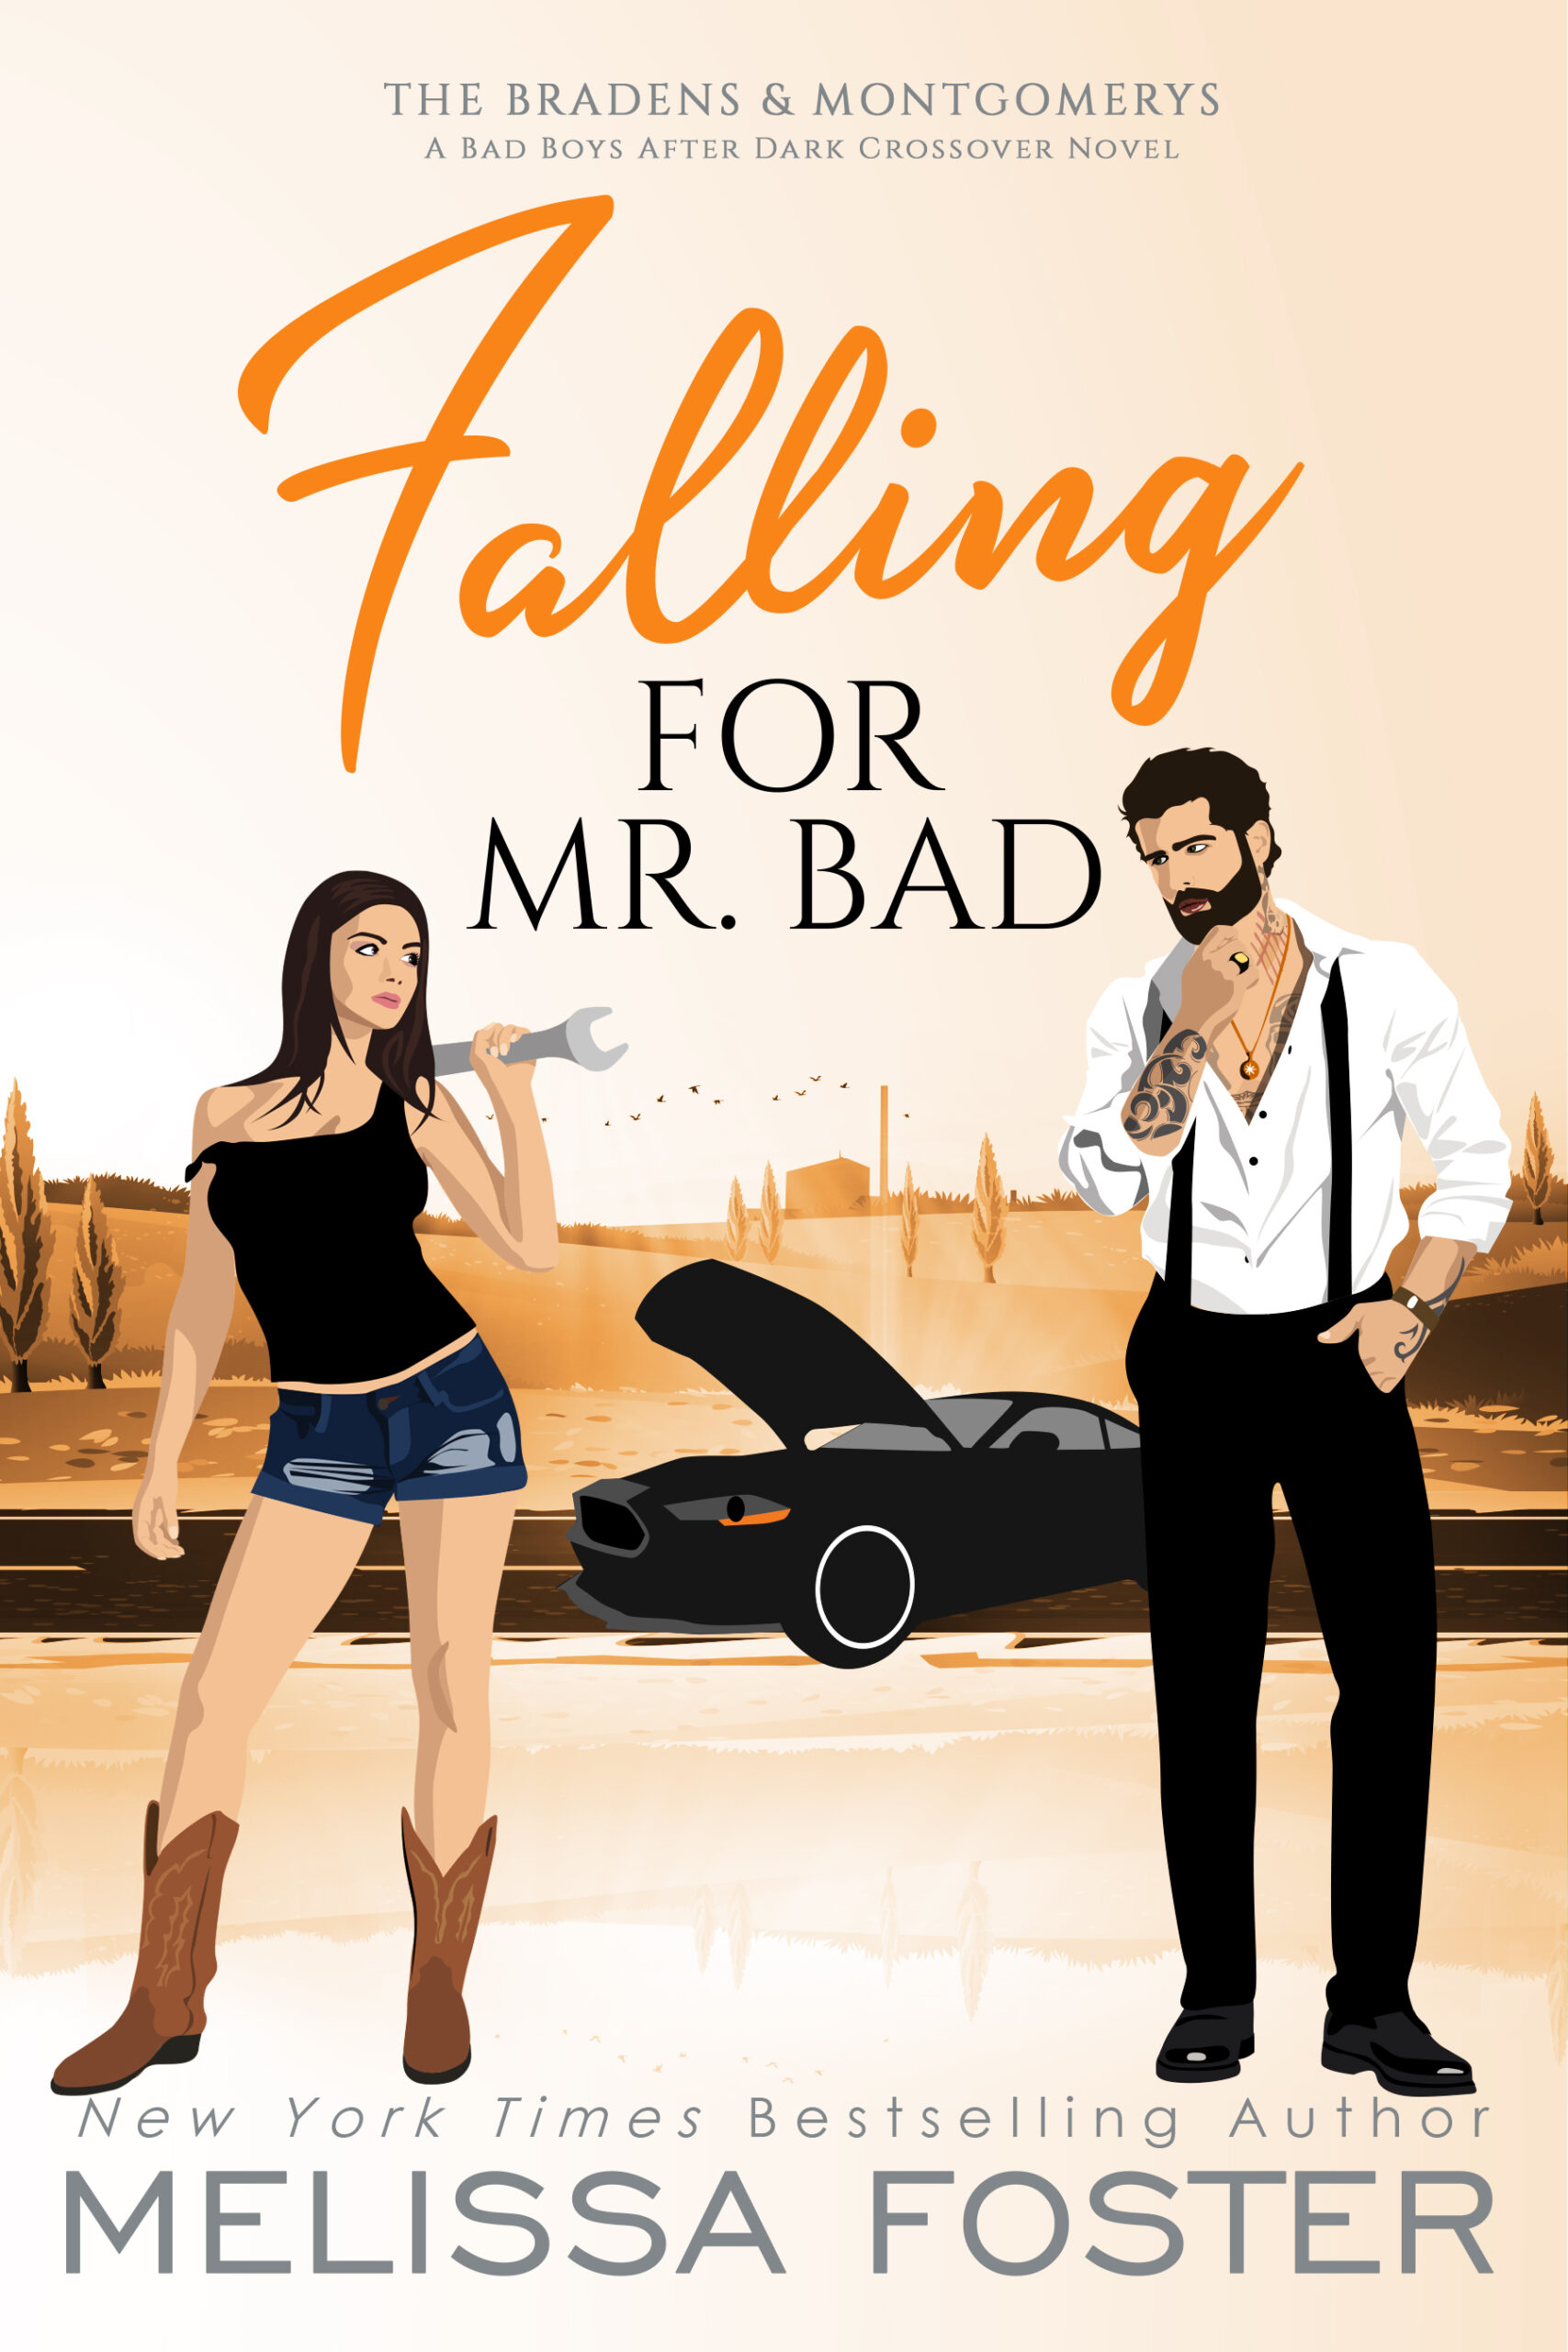 Falling for Mr. Bad Special Edition by Melissa Foster